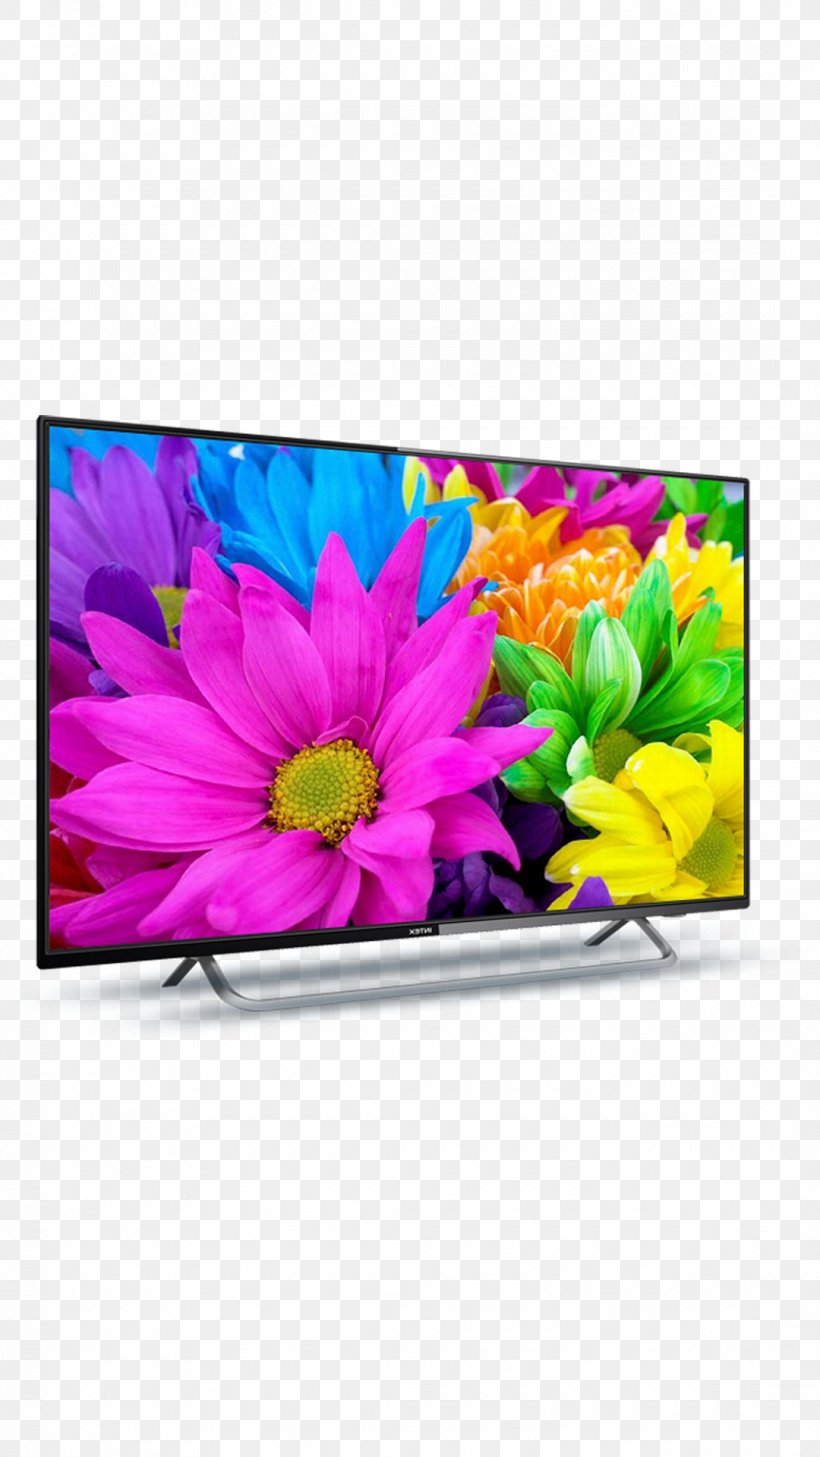 LED-backlit LCD High-definition Television 1080p Smart TV, PNG, 1080x1920px, 4k Resolution, 43 Inches, Ledbacklit Lcd, Chrysanths, Cut Flowers Download Free